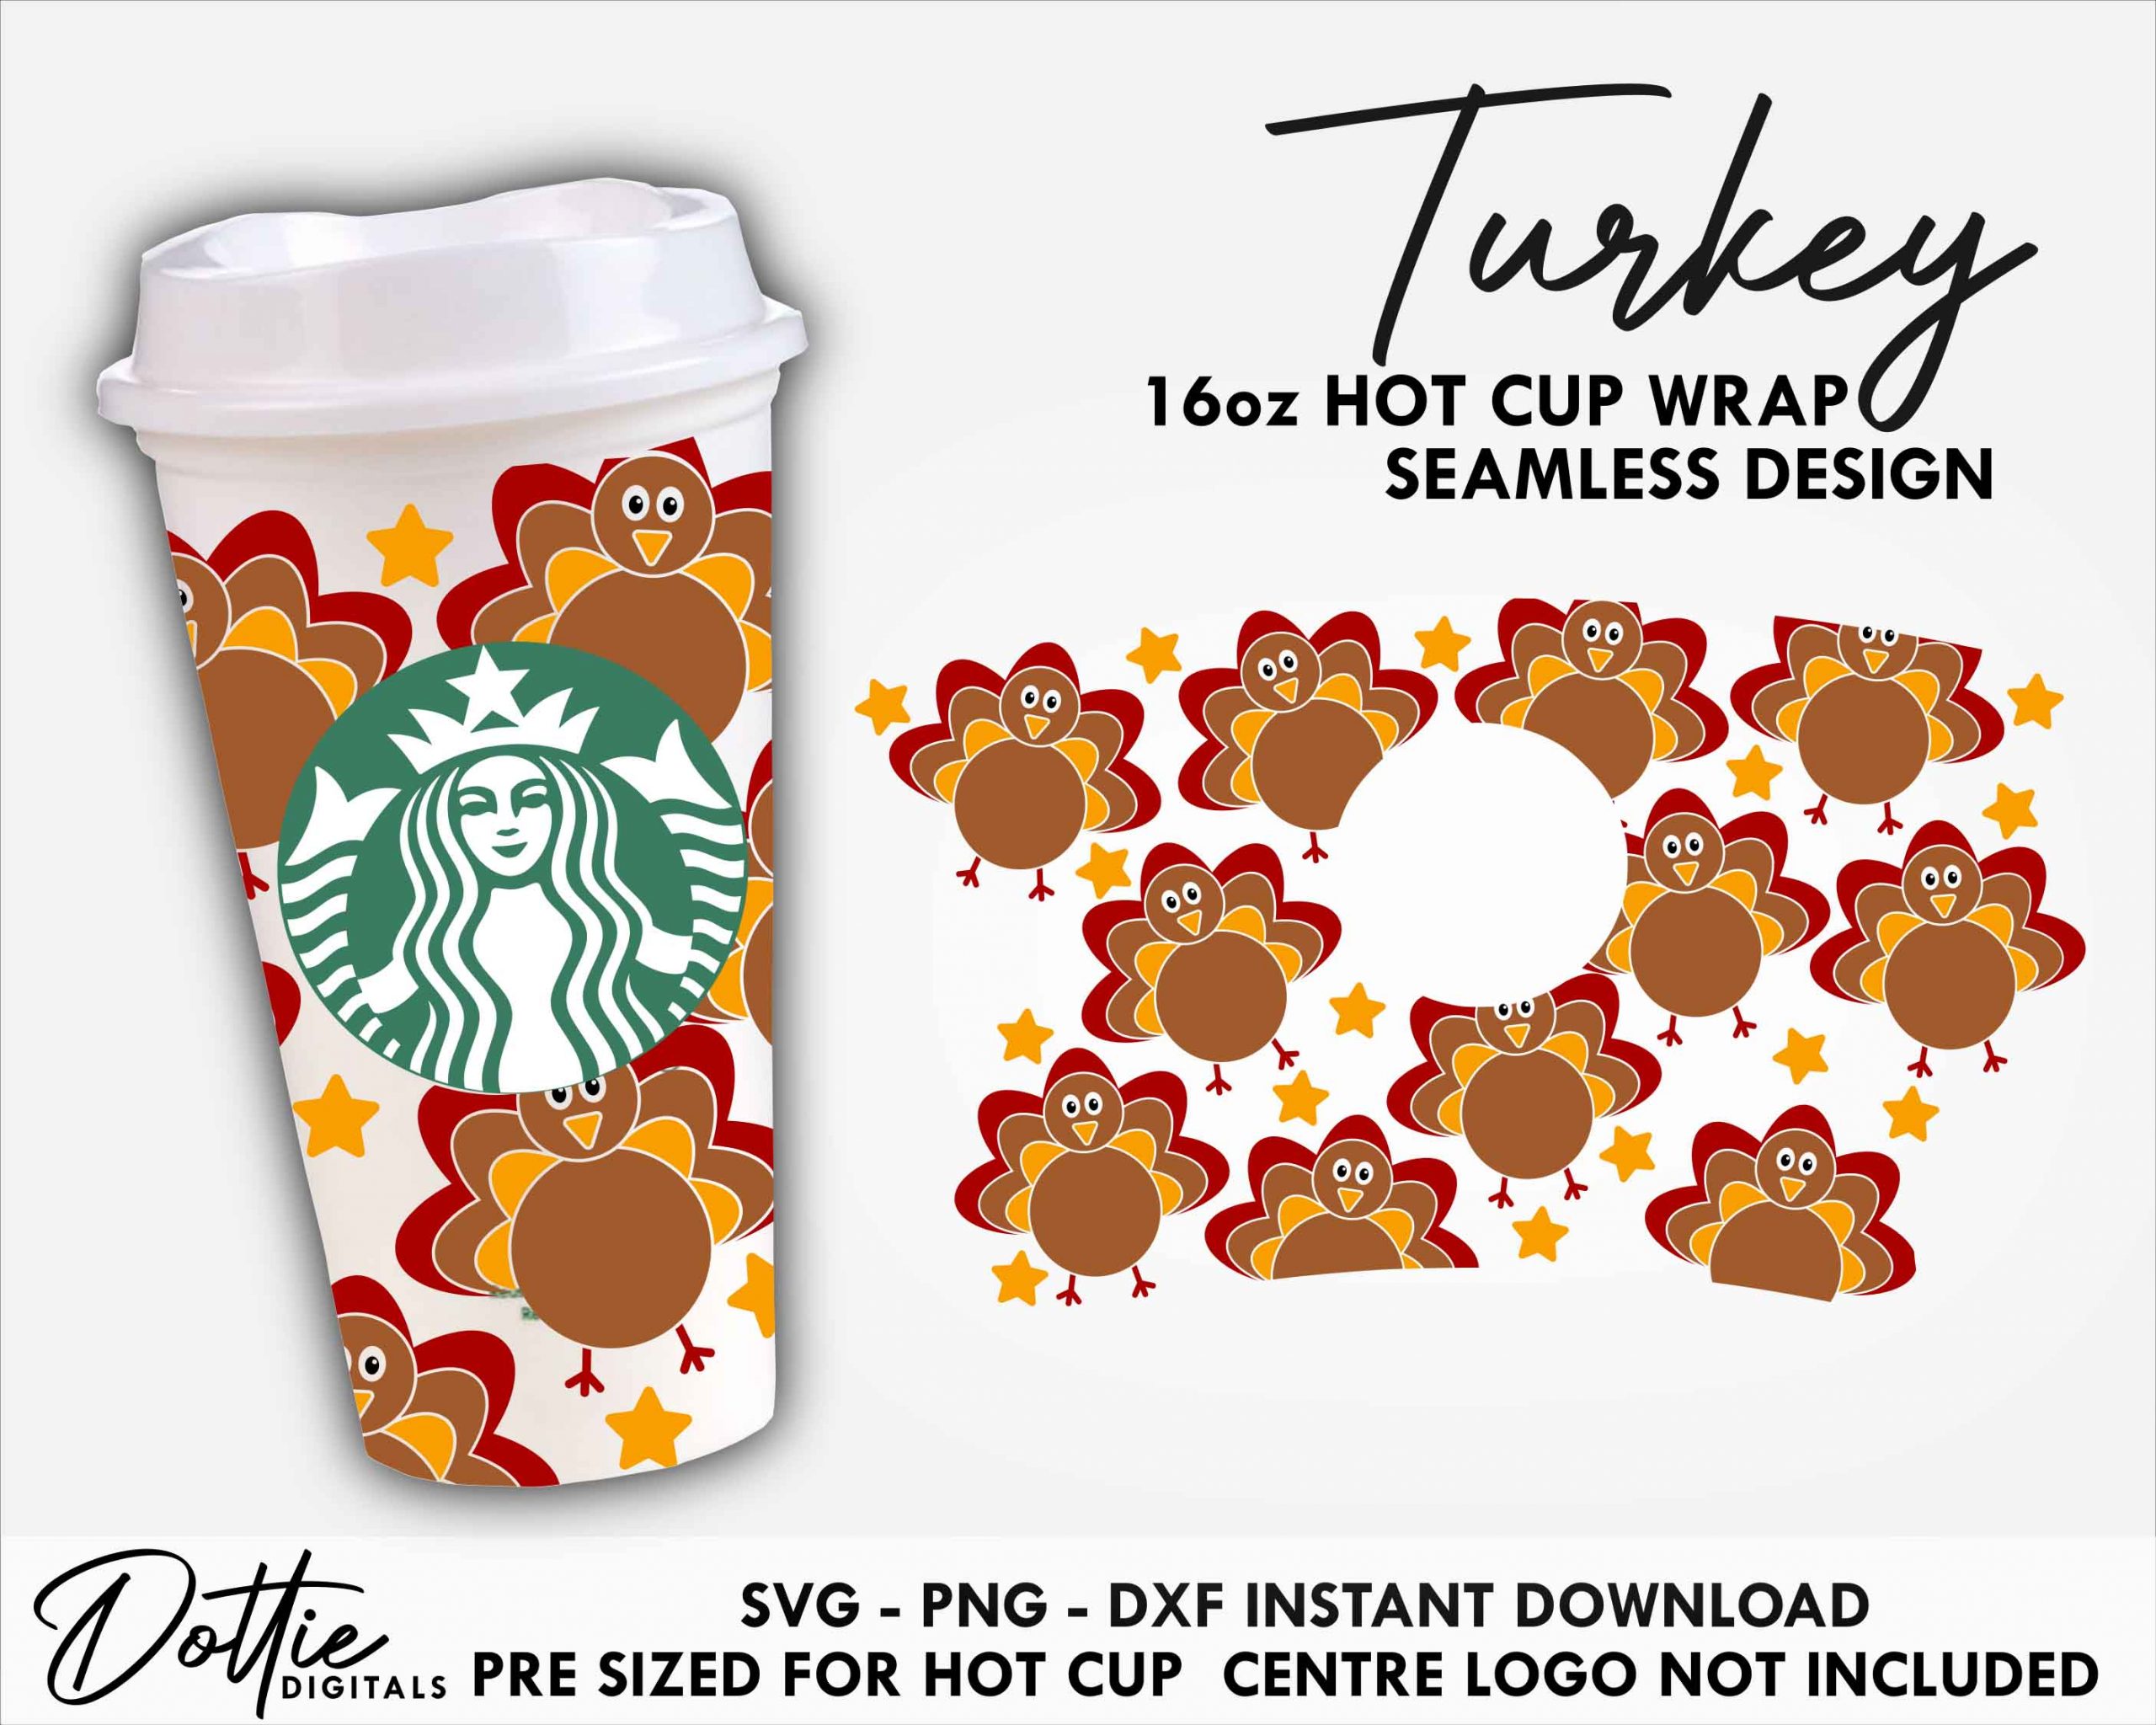 Drink Coffee Be Happy starbucks 16oz hot cup wrap SVG